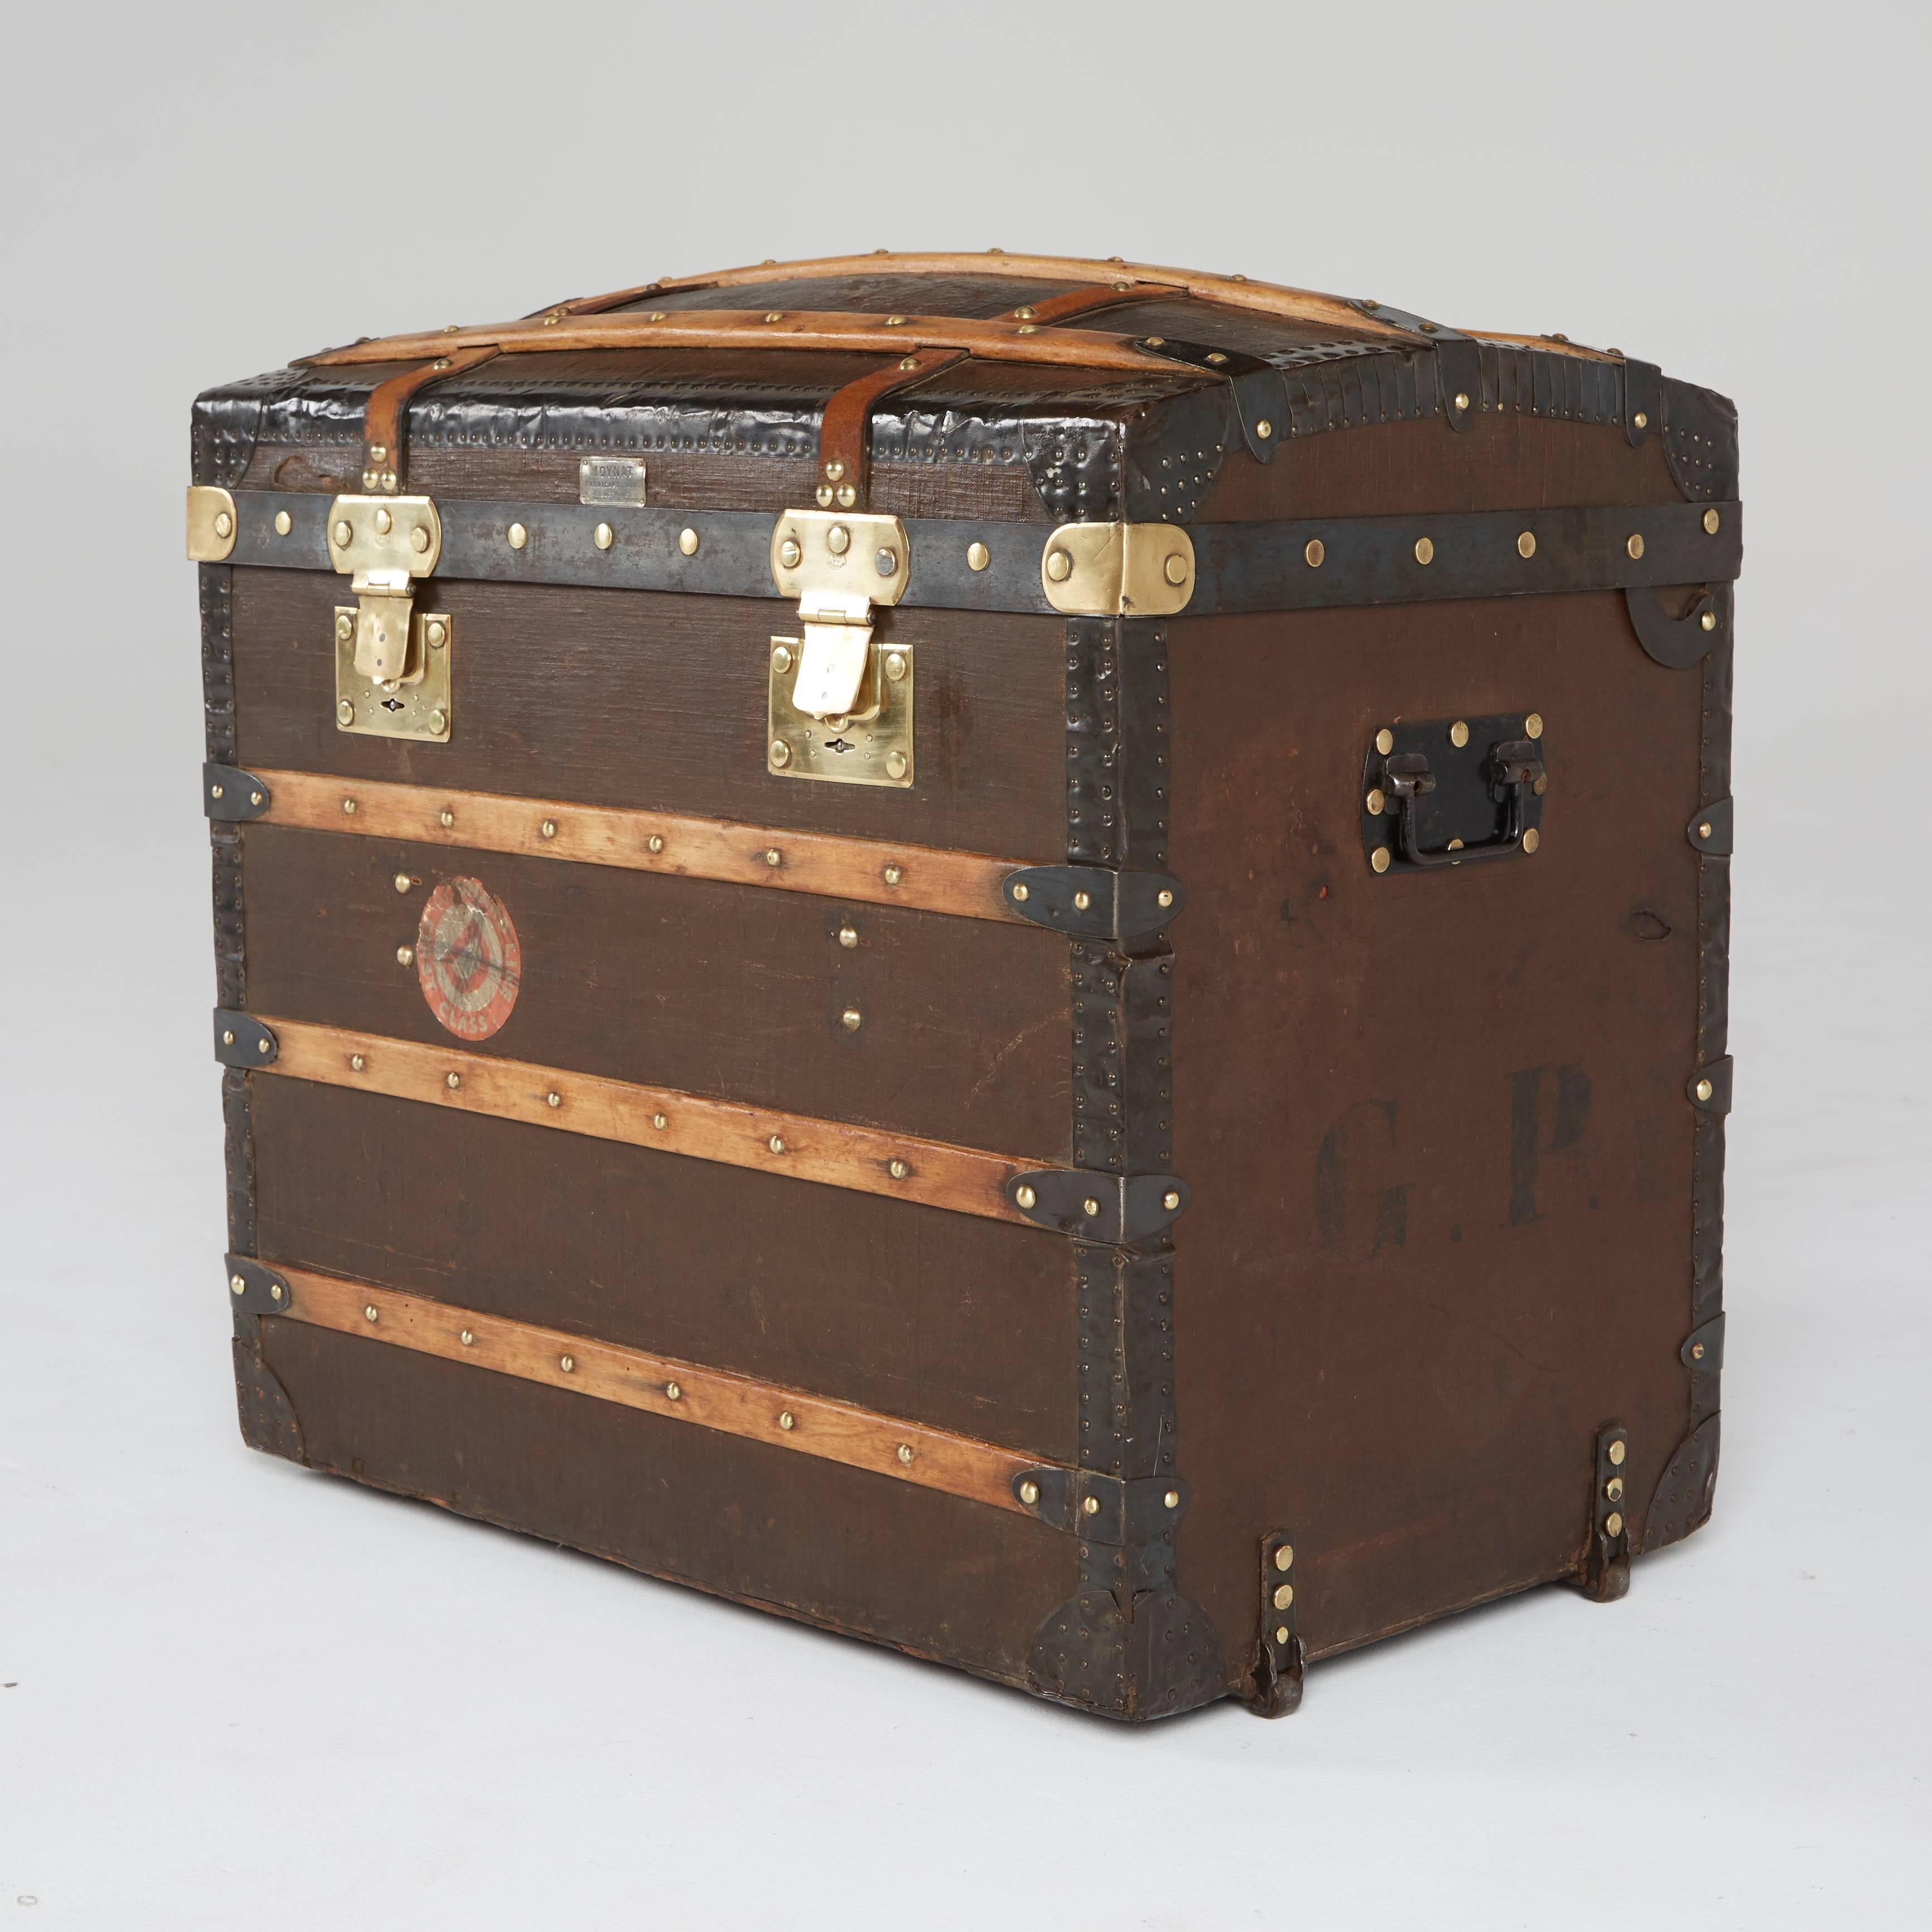 This classic steamer trunk is a fine display of luxury by the oldest French trunk maker, Moynat. Recently restored by a specialized trunk restoration expert, this fine example of history is now ready to be placed into a luxurious setting.

Adorning